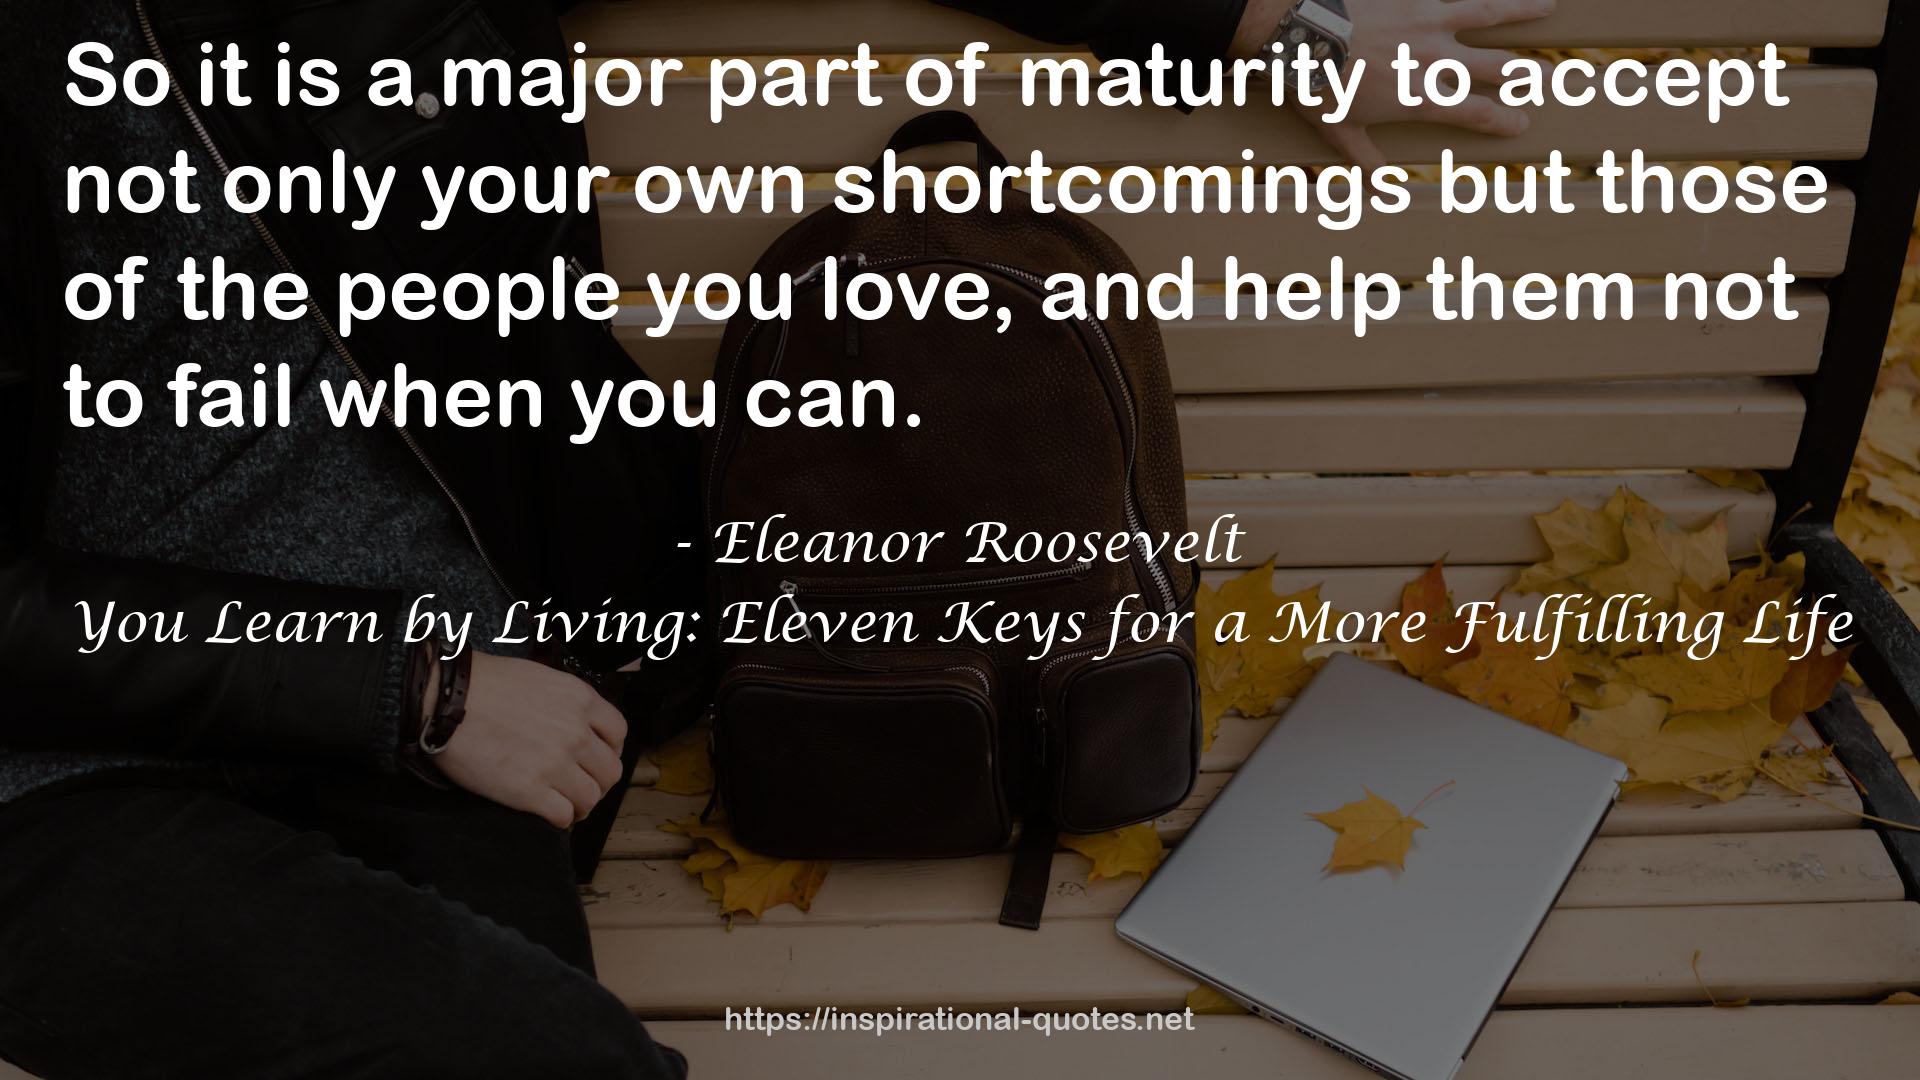 You Learn by Living: Eleven Keys for a More Fulfilling Life QUOTES